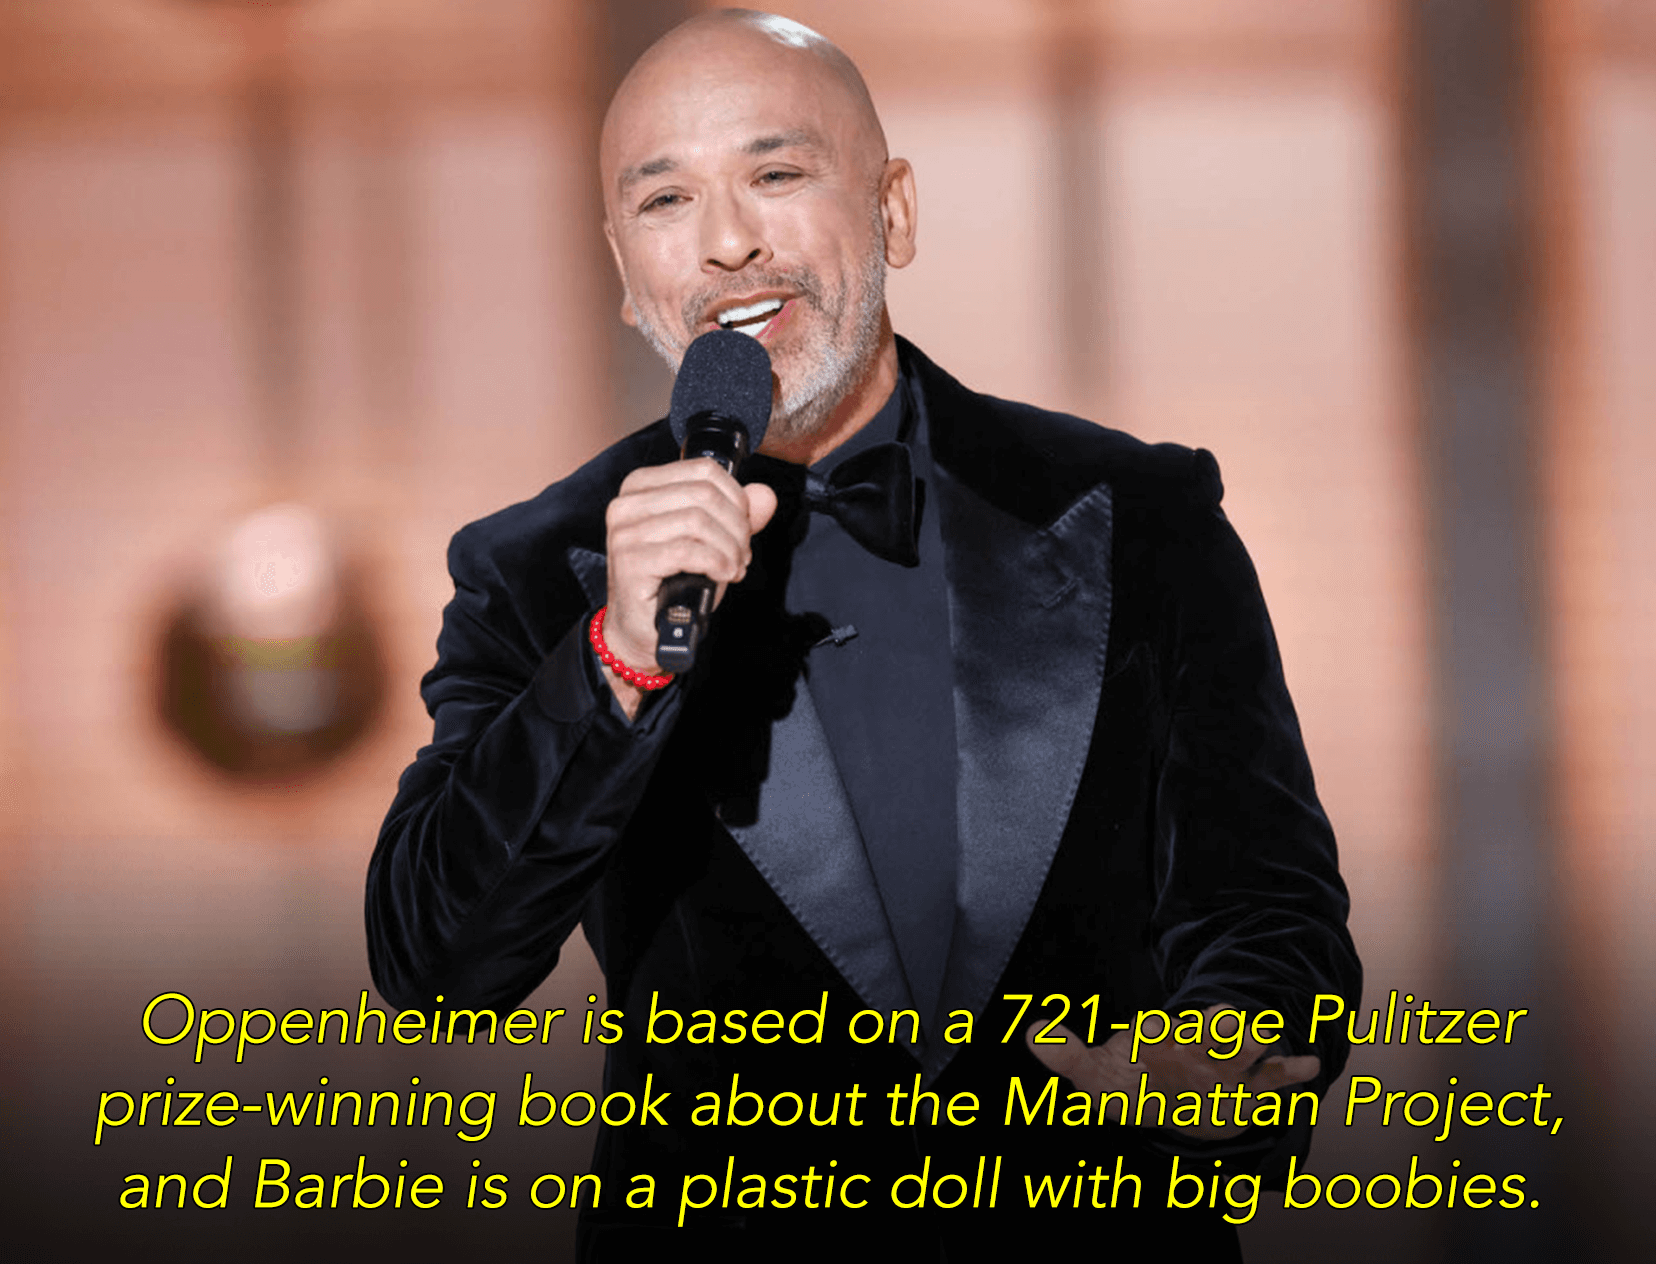 Jo Koy Reducing &#8216;Barbie&#8217; To Be About Plastic Dolls Proved Why The Movie Needed To Be Made